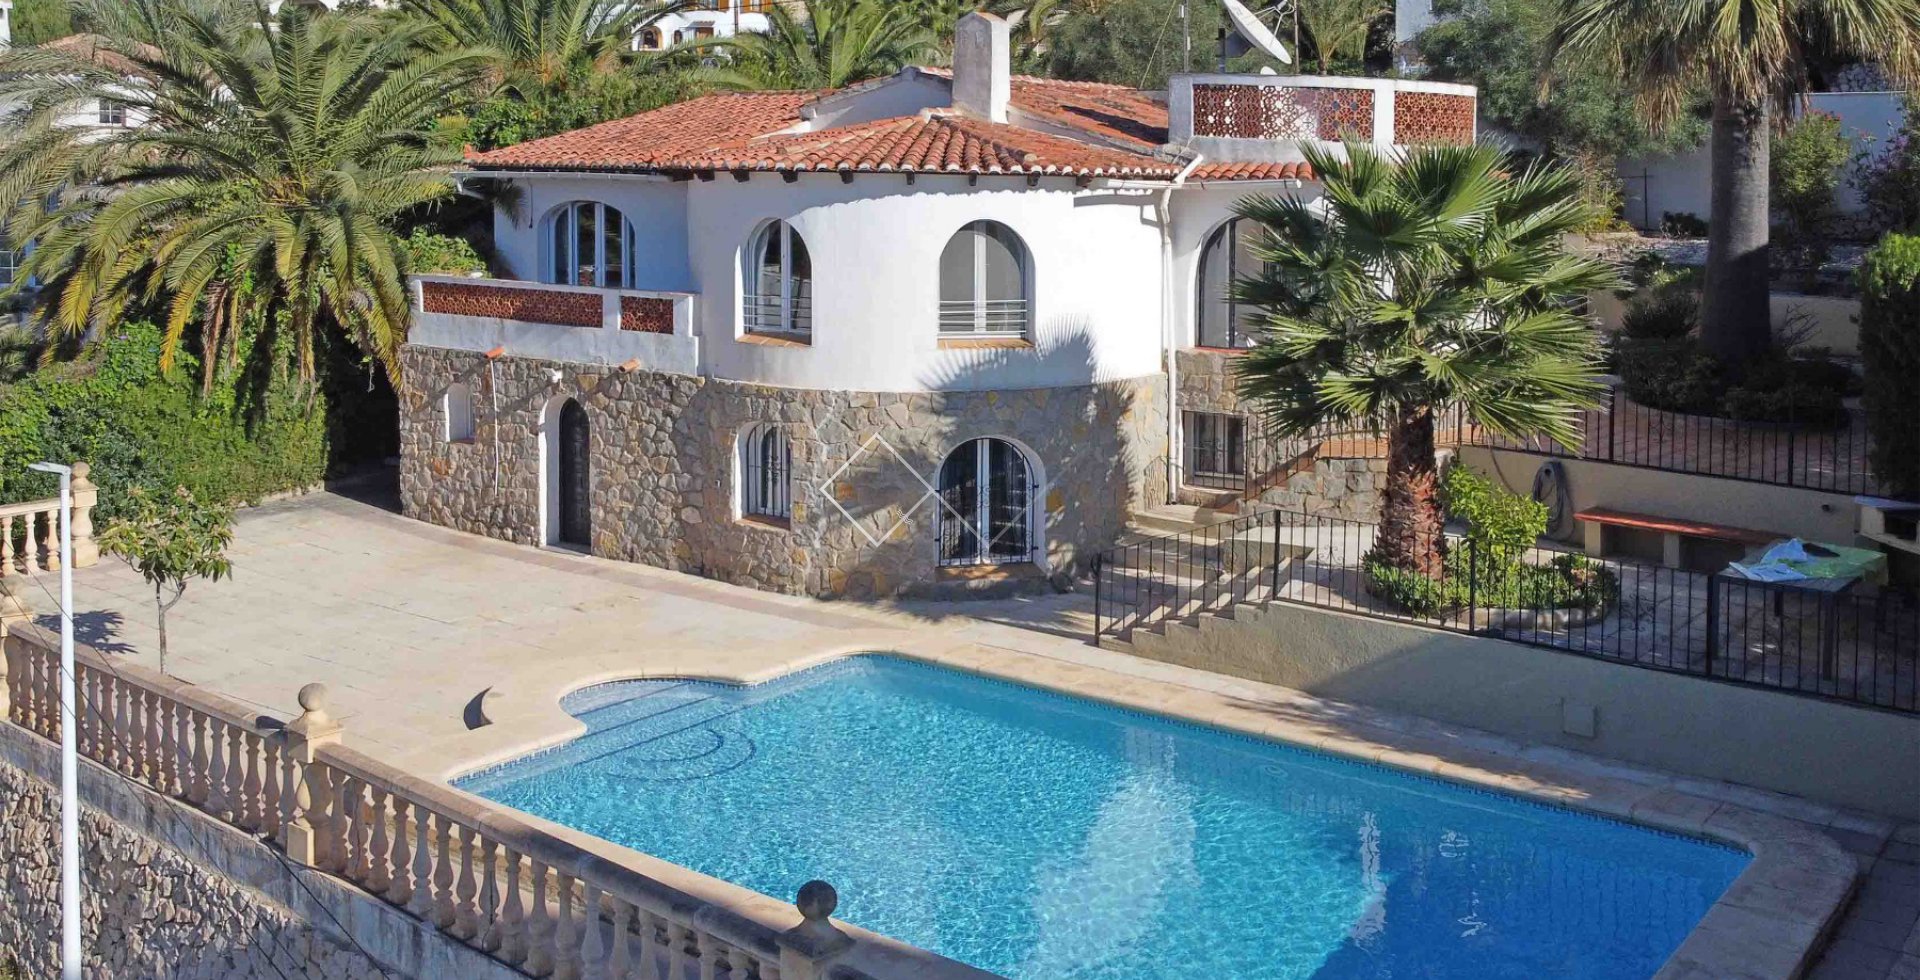 villa and pool - Renovated villa for sale in Benissa, 400m from beach